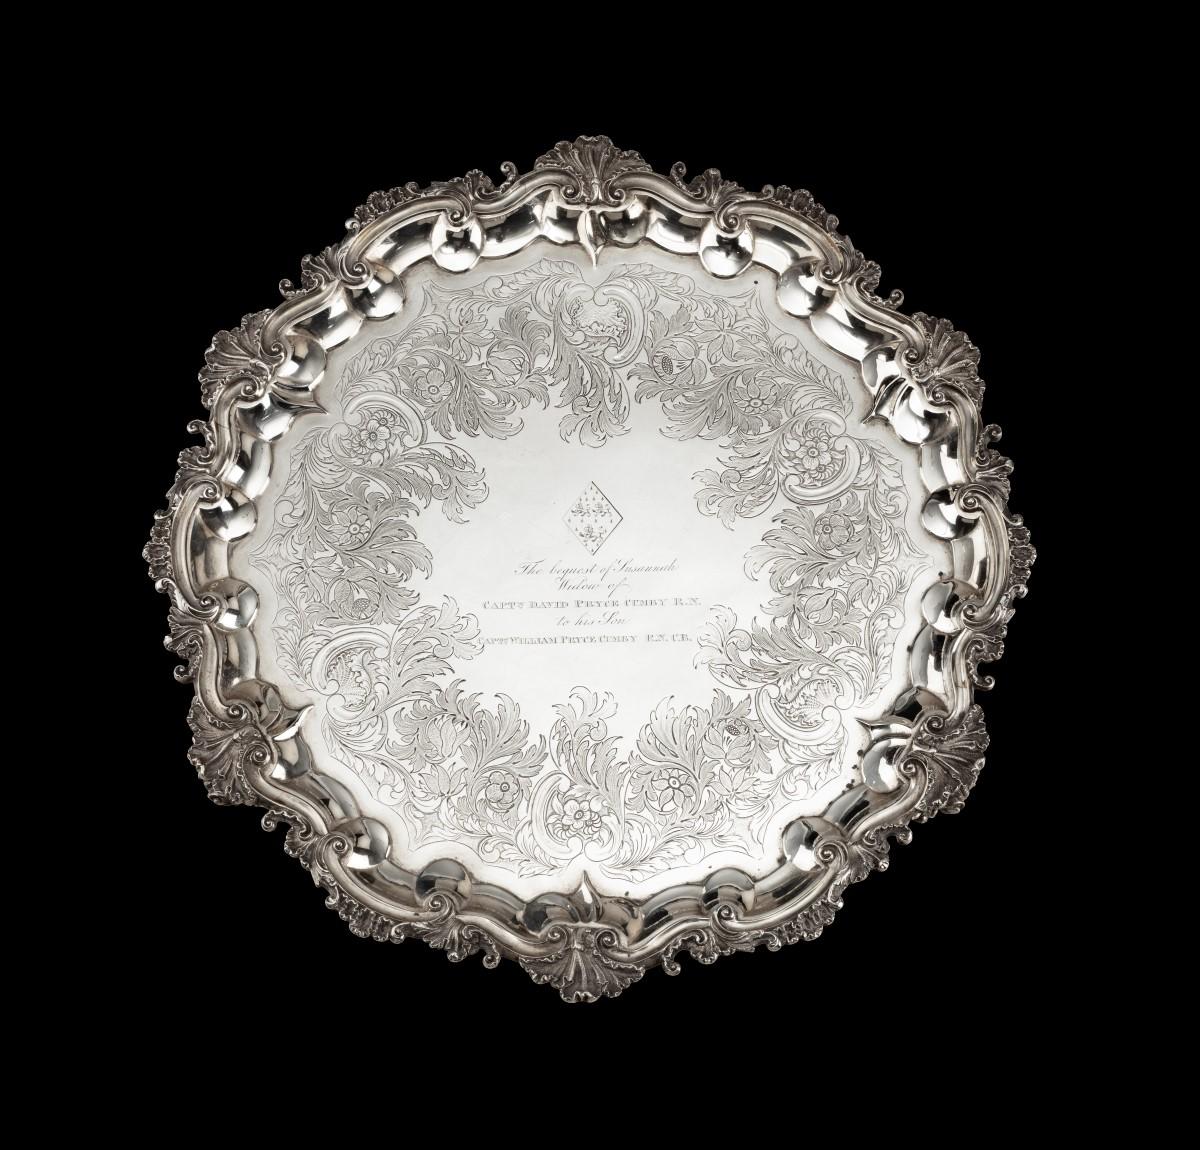 A William IV silver salver with shellwork and scroll border, on four feet, profusely chased and engraved with foliate decoration and inscribed in the centre beneath a widow’s coat of arms: The bequest of Susannah Widow of Captn David Pryce Cumby